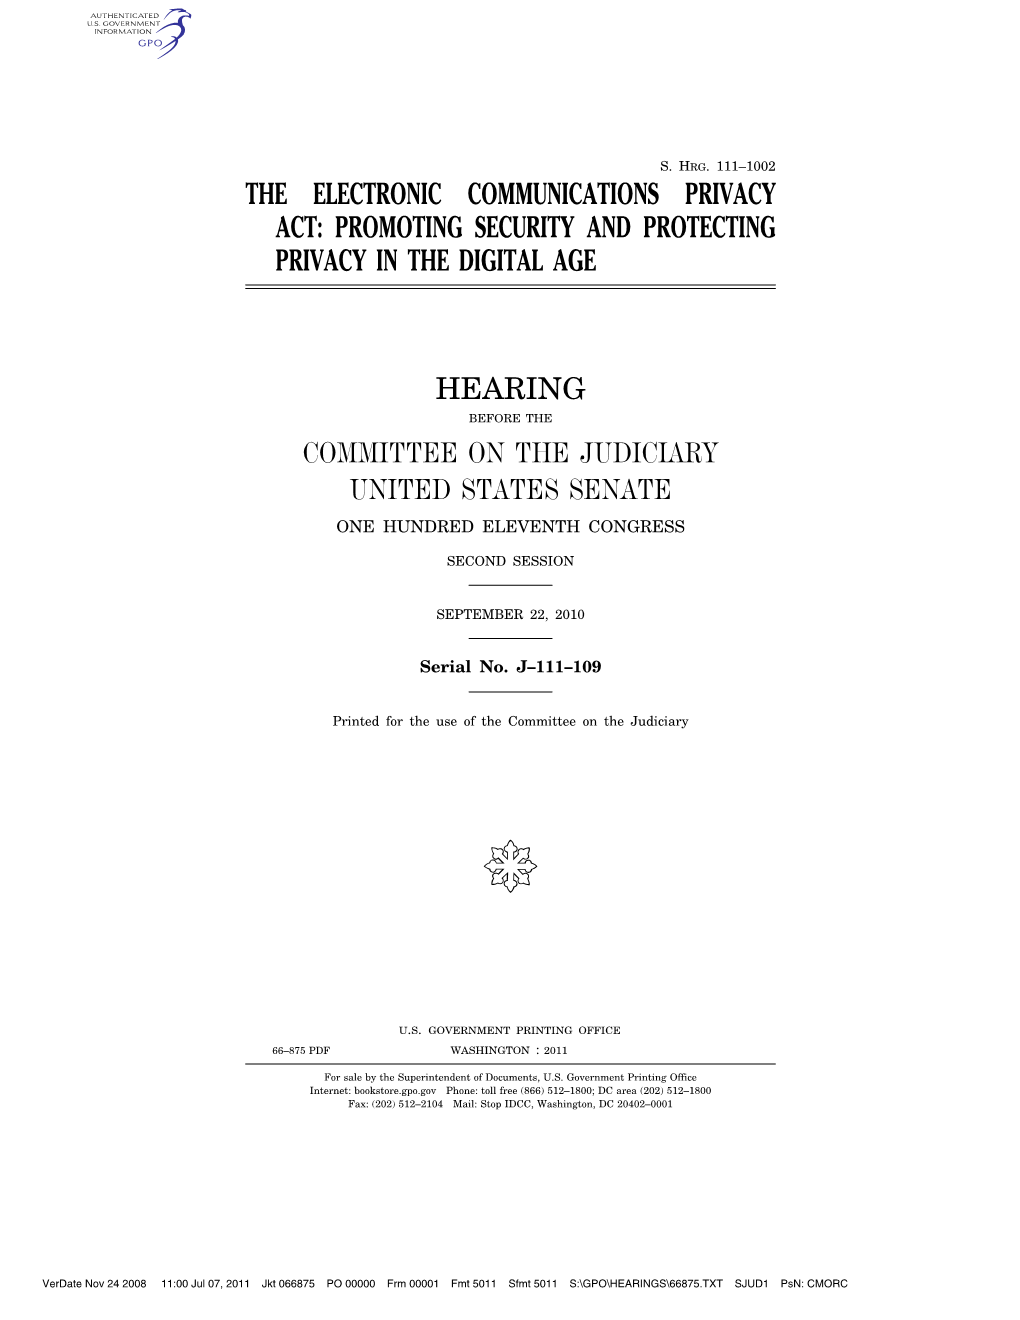 The Electronic Communications Privacy Act: Promoting Security and Protecting Privacy in the Digital Age Hearing Committee On